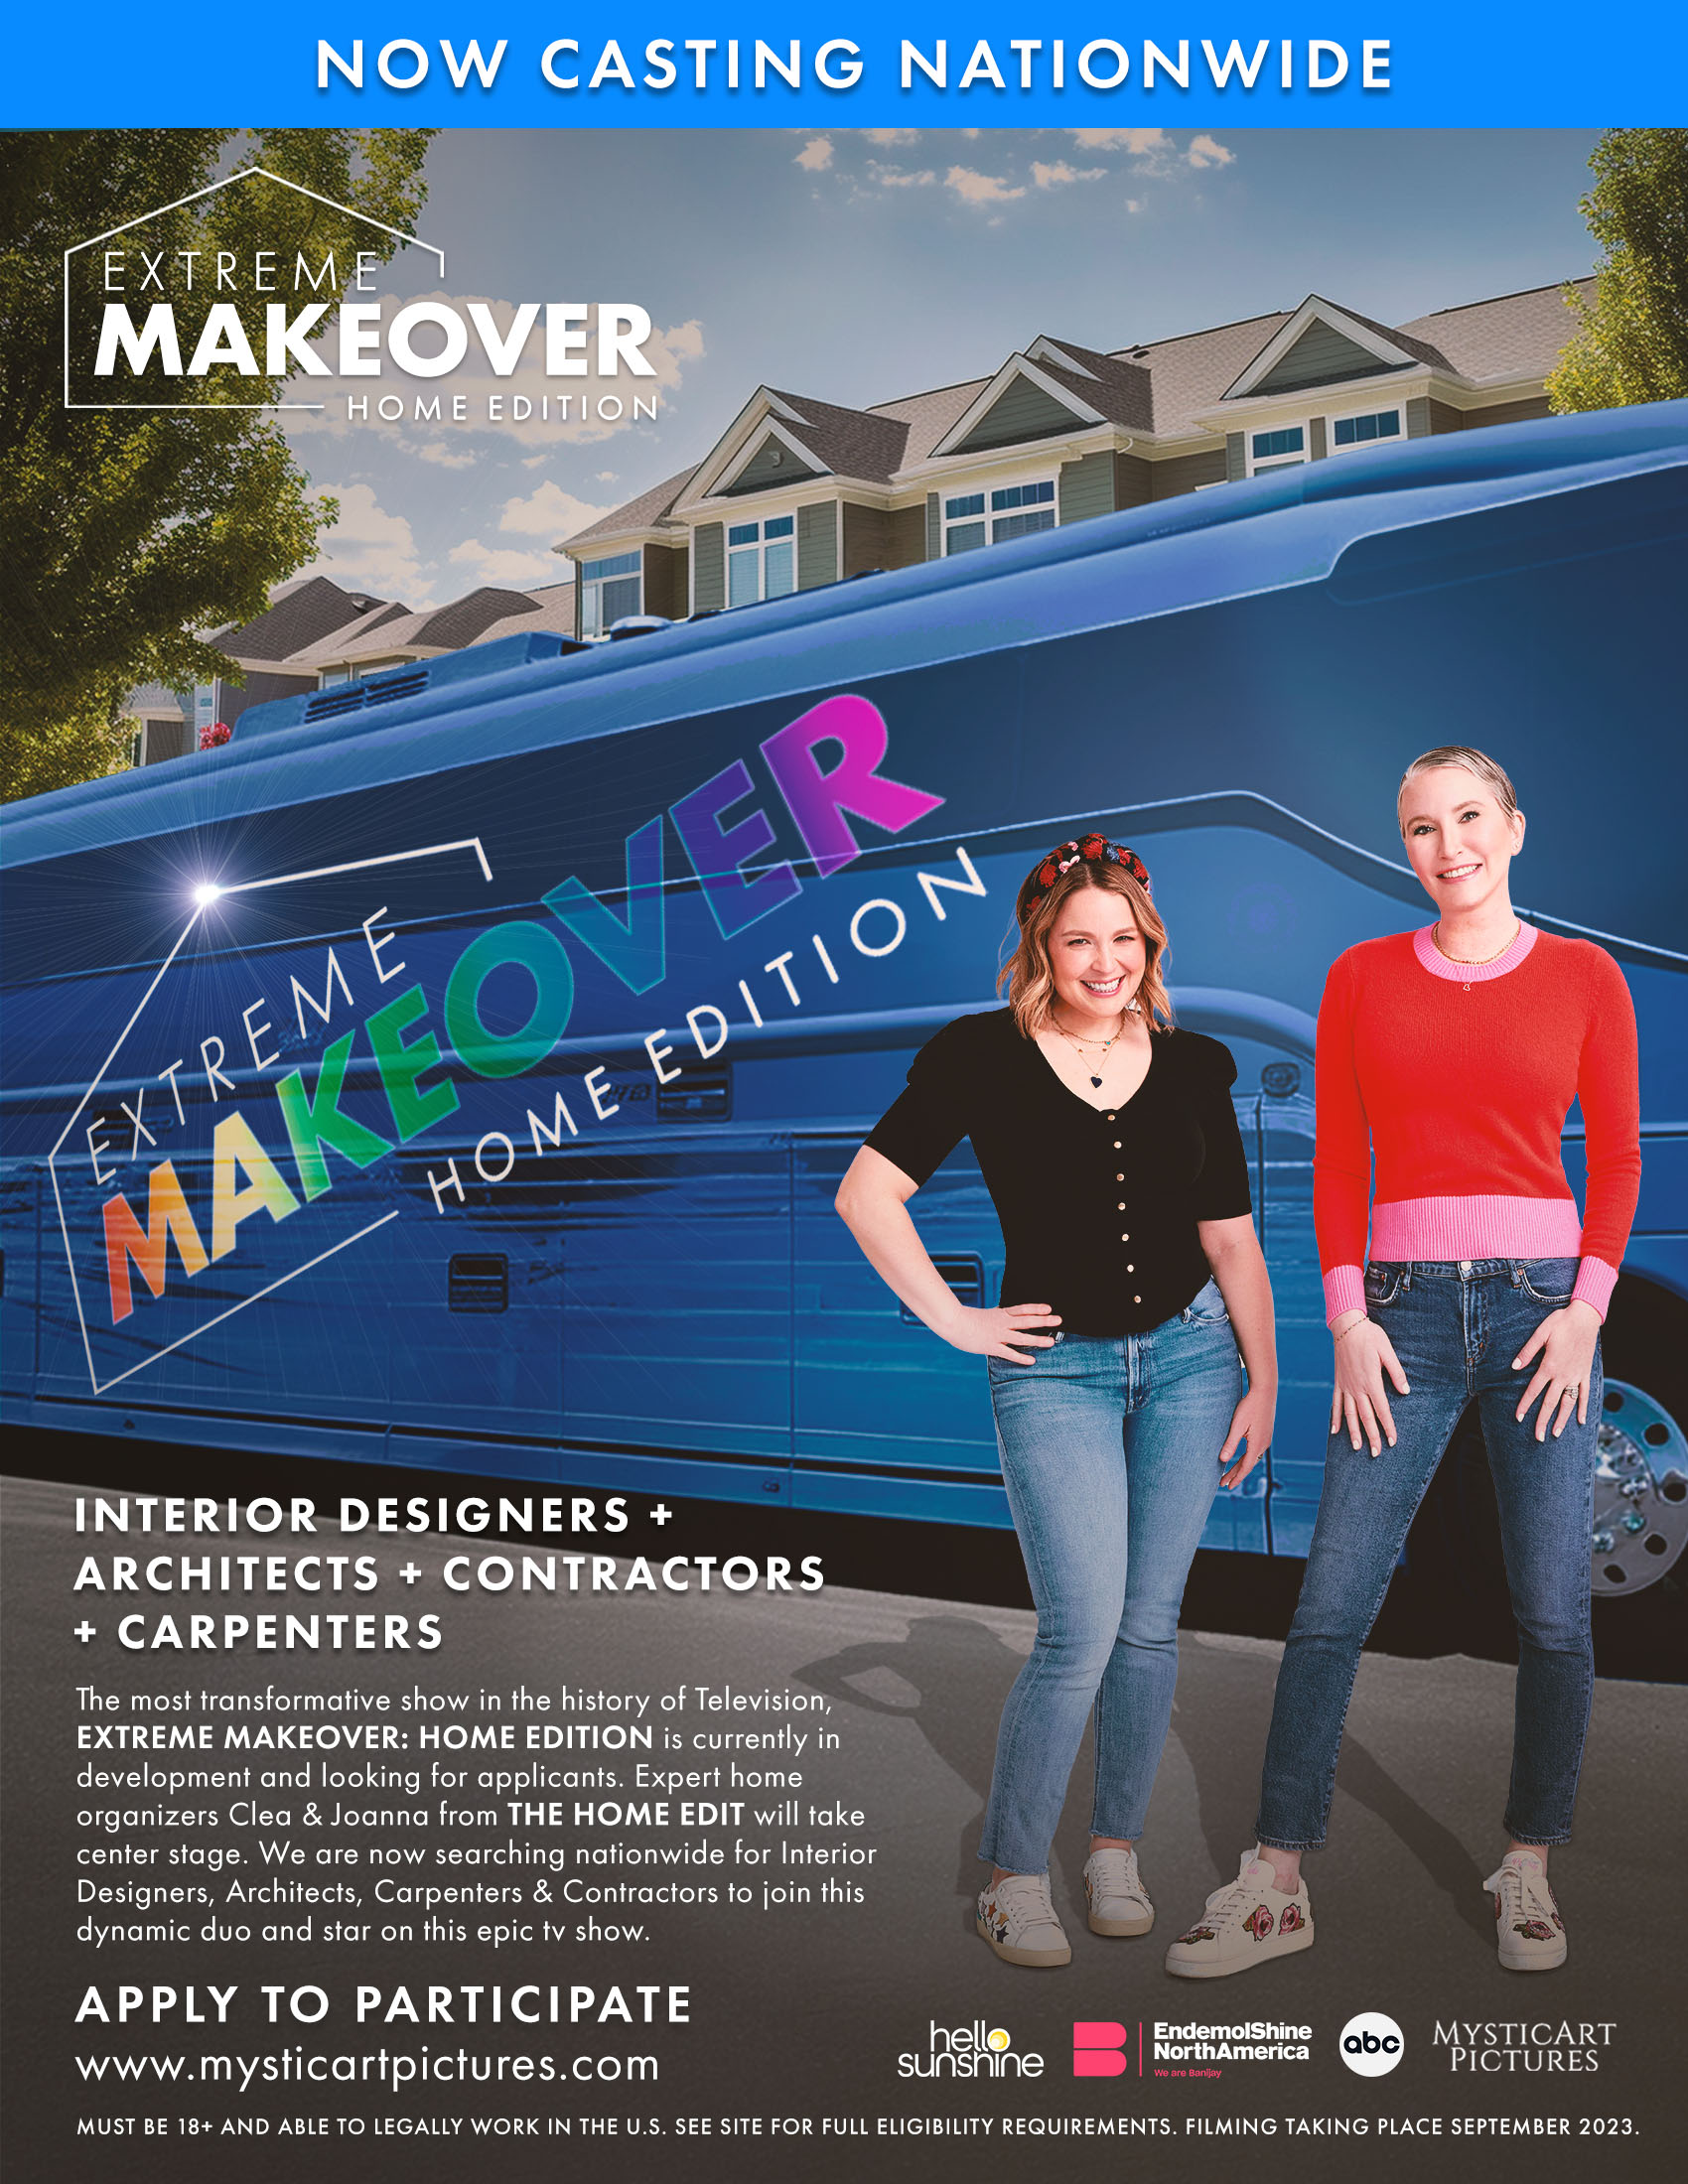 Casting Extreme Makeover Home Edition